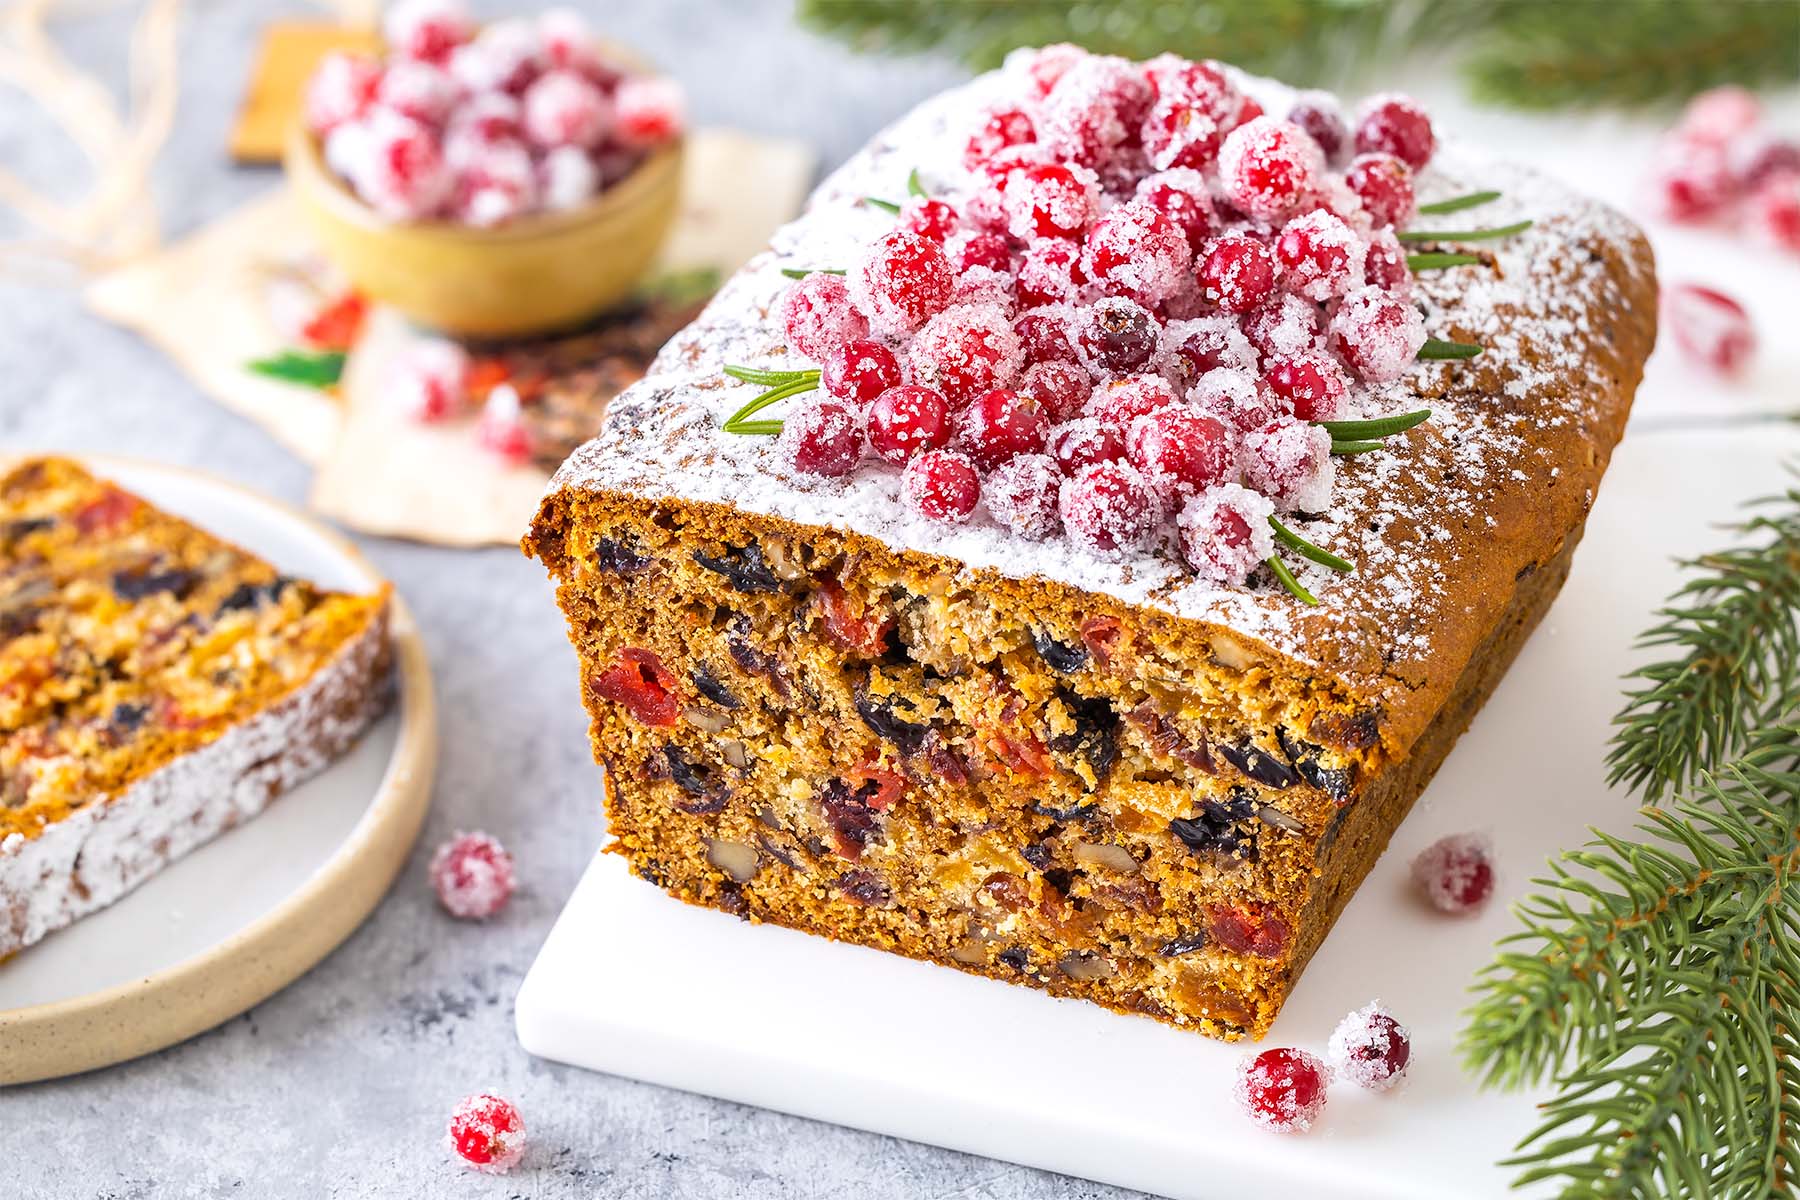 Fruit loaf cake decorated with sugared cranberries